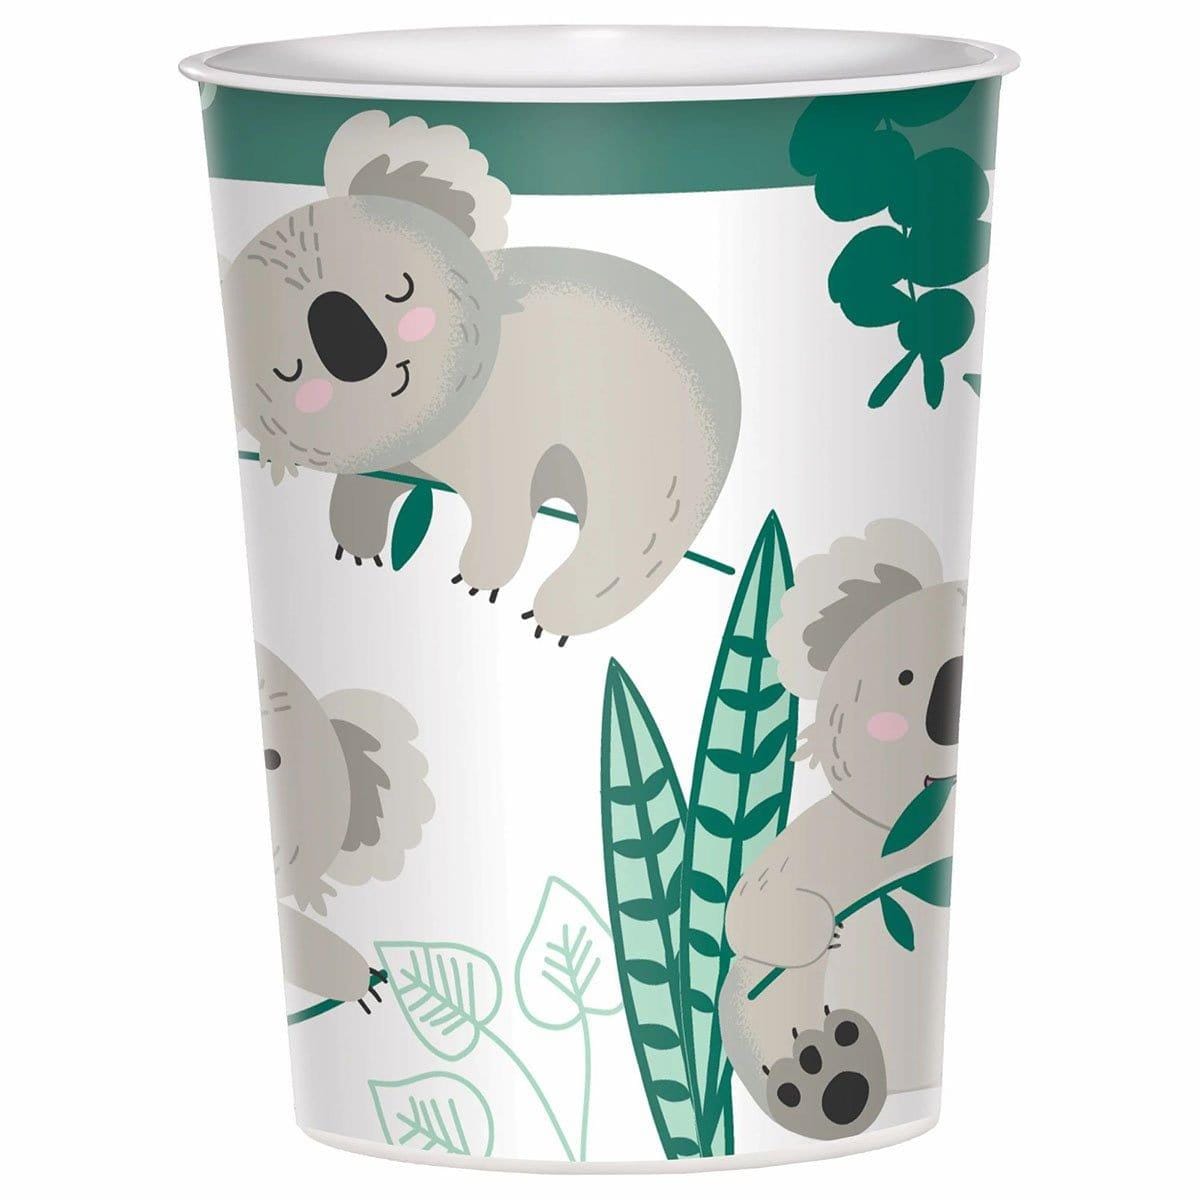 Buy Kids Birthday Koala Party Favor Cup sold at Party Expert